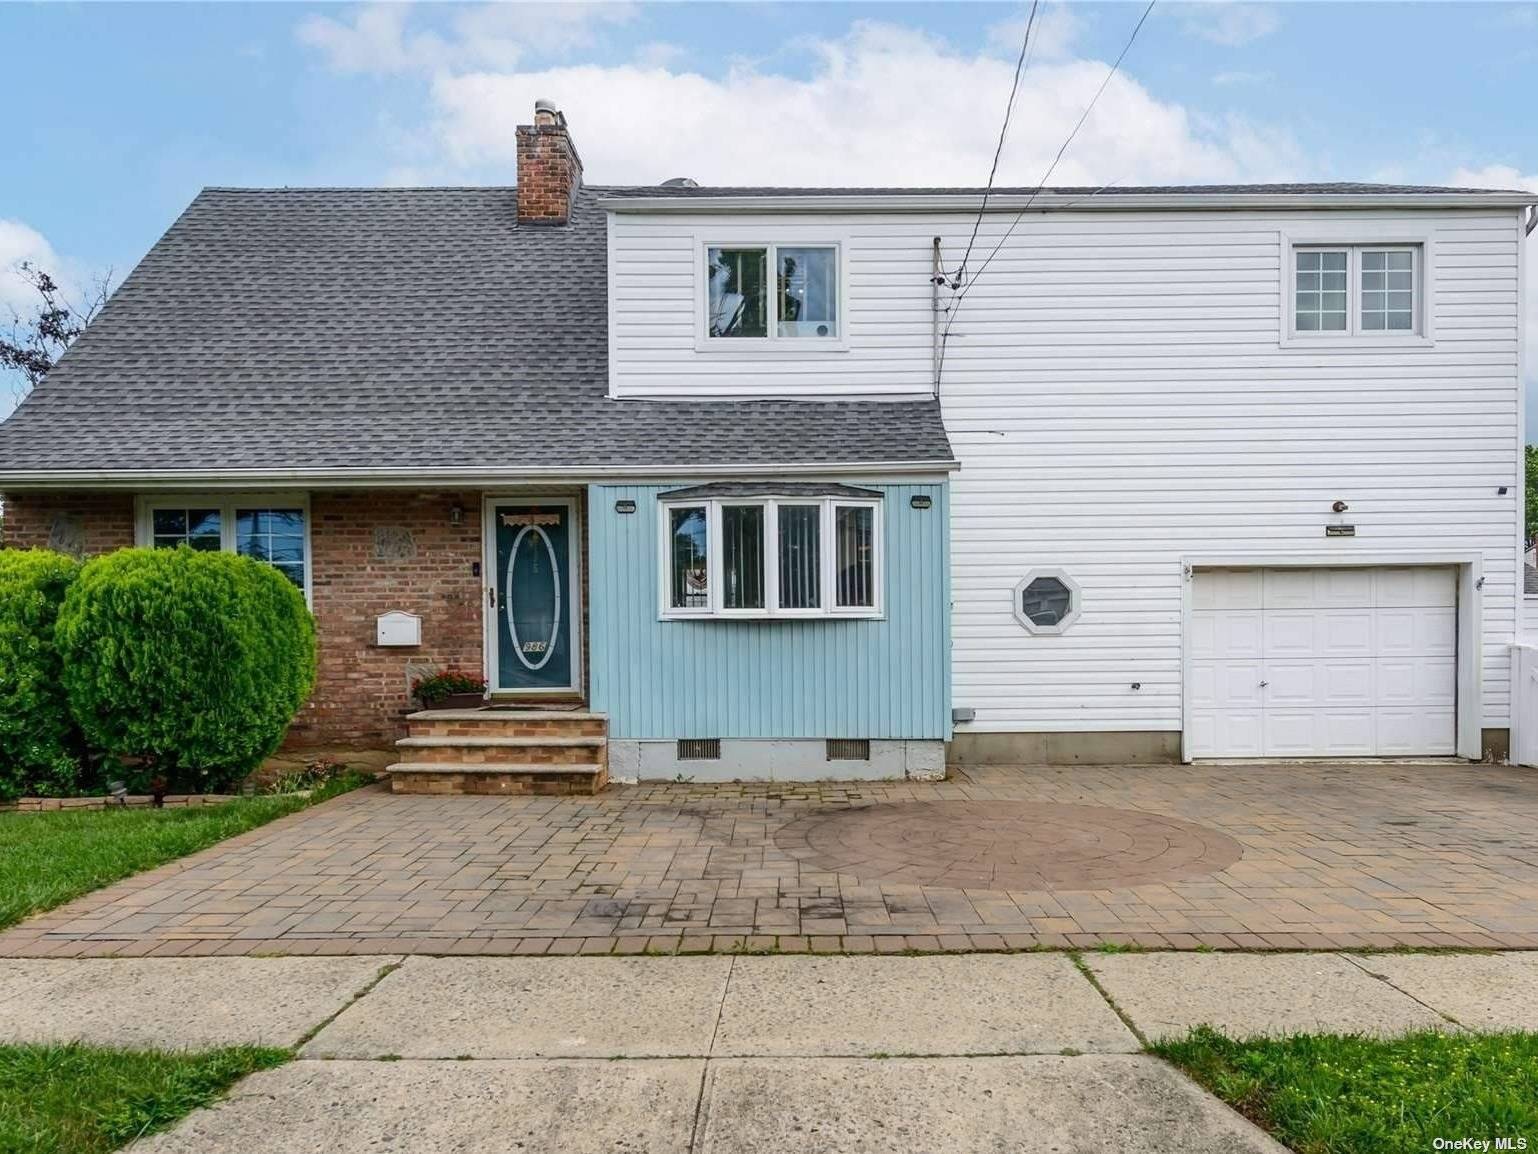 Beautiful 4 bedroom, 3 full bath Colonial located in the heart of New Hyde Park and updated throughout featuring spacious sunlit principal rooms and brand new mahogany hardwood flooring throughout.